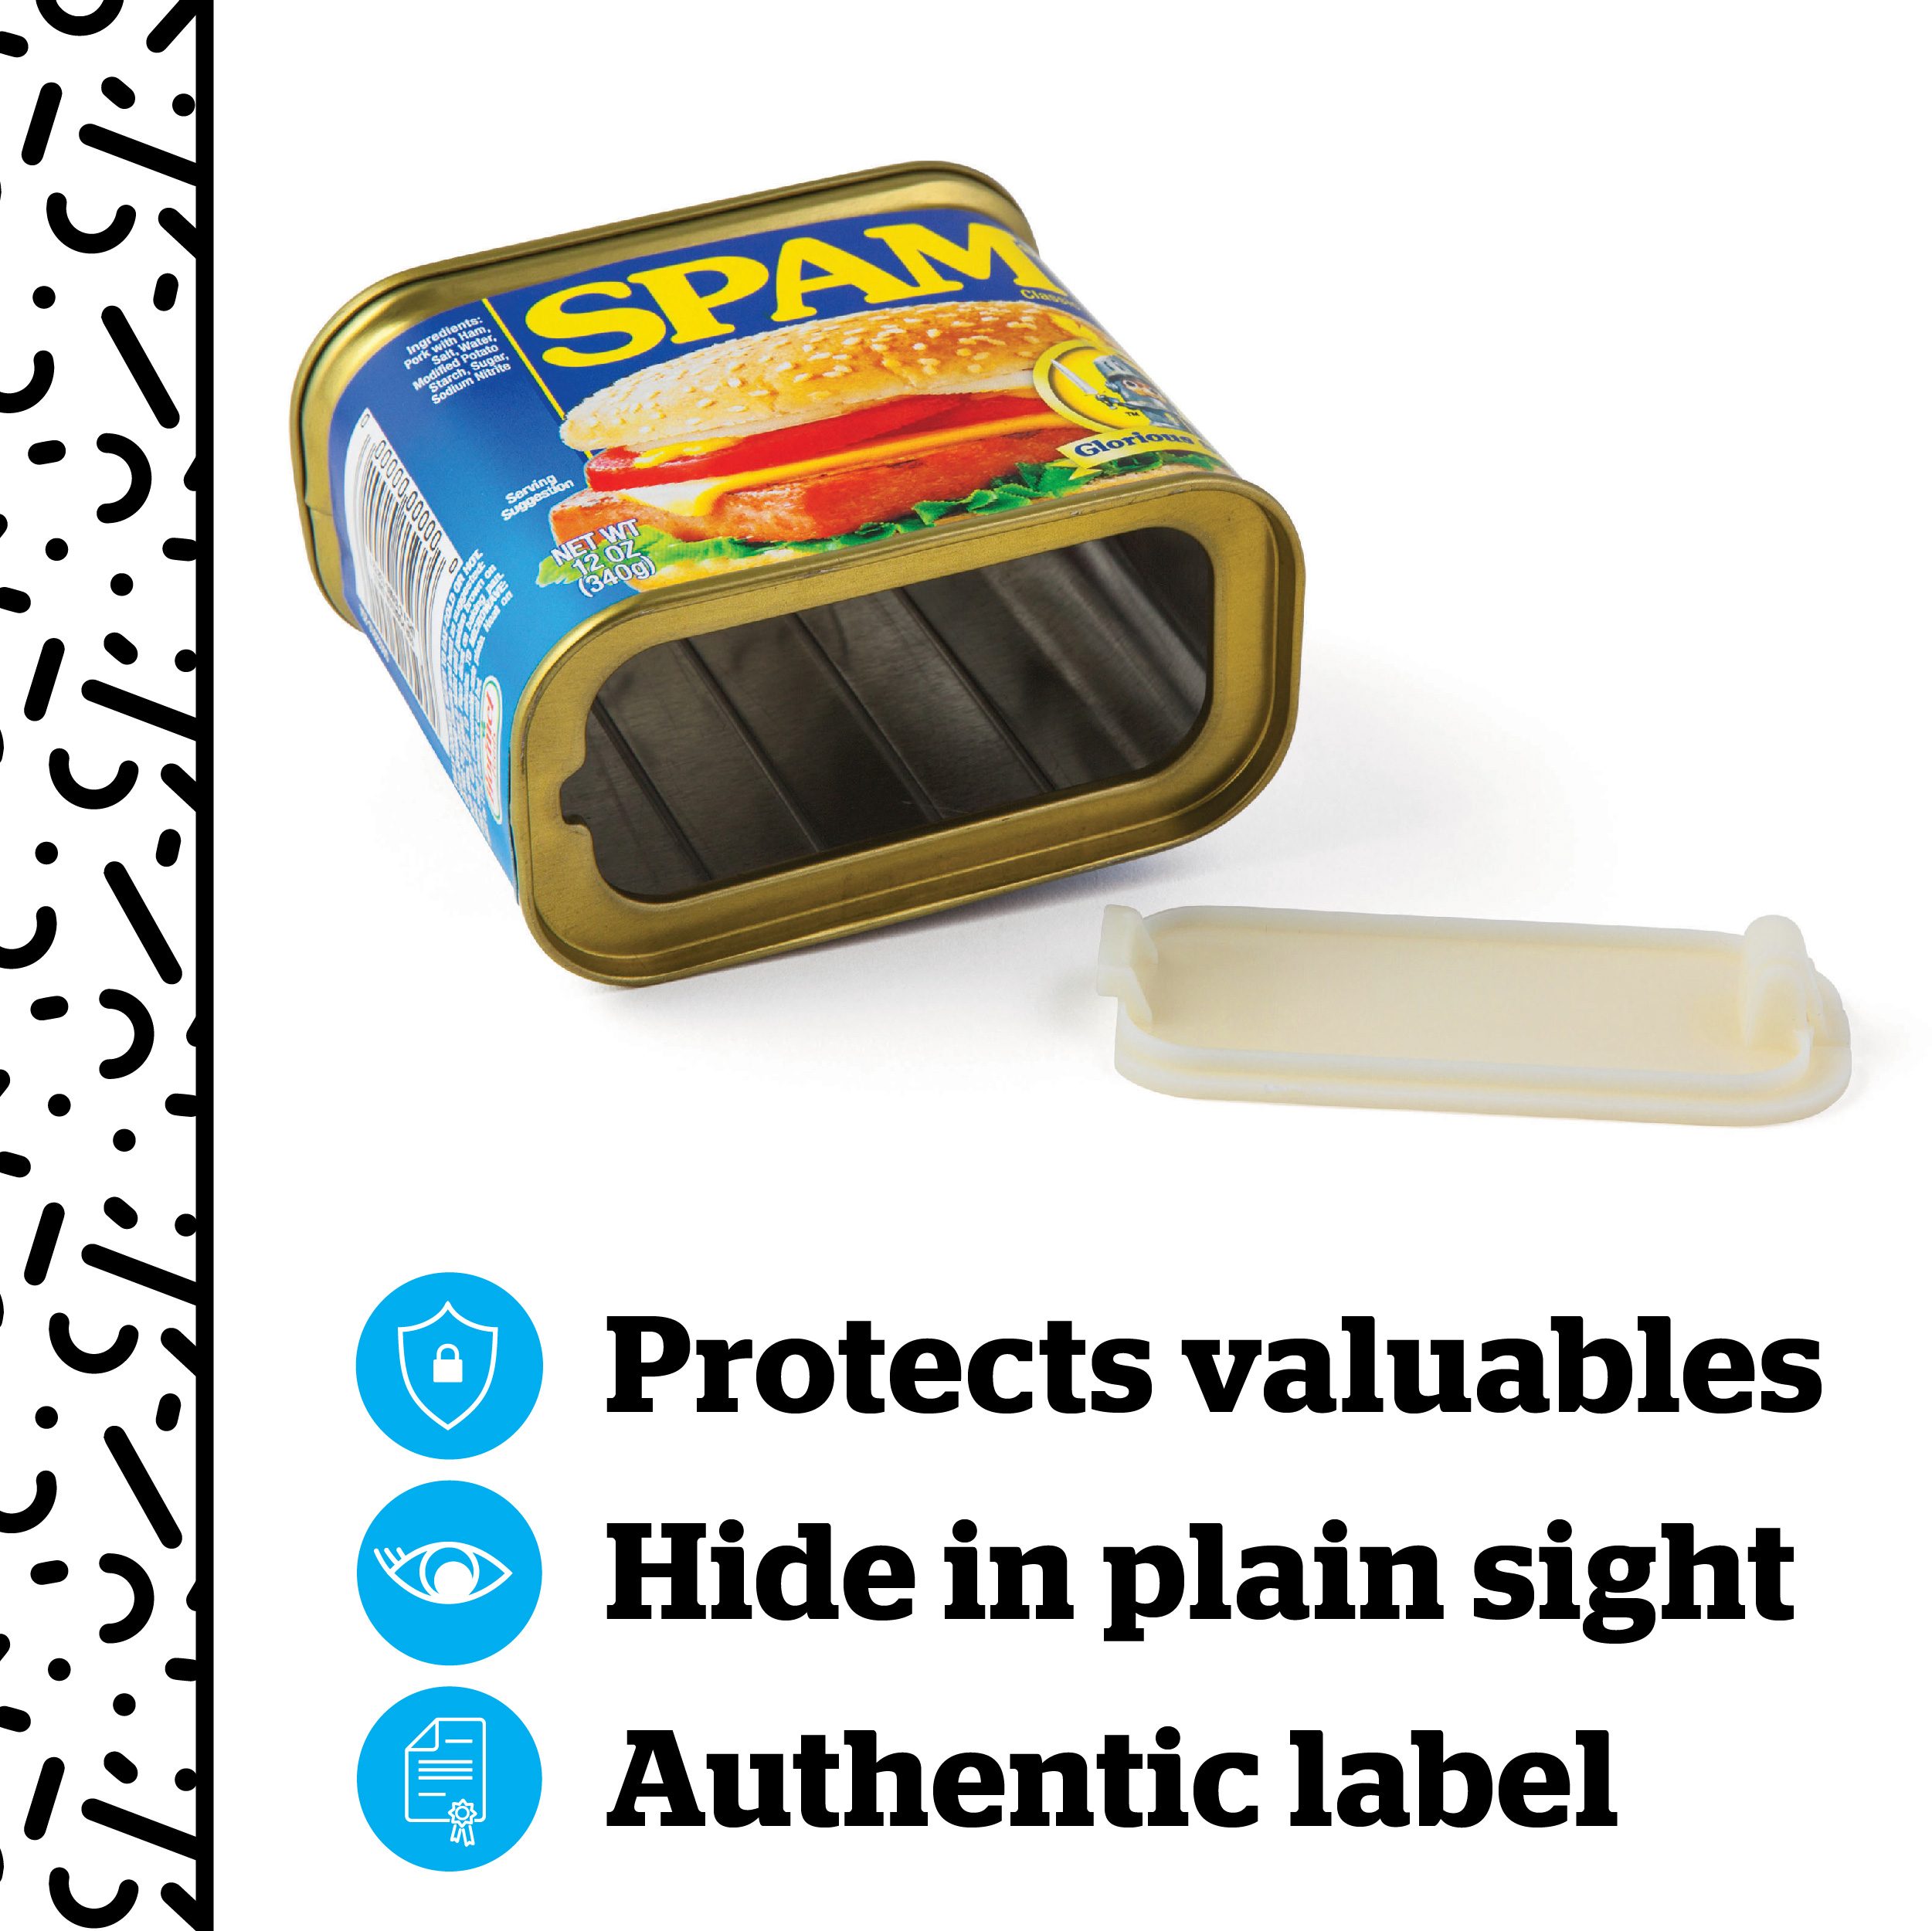 BigMouth Inc SPAM Can Safe — Great Hiding Place for Storing Valuables, 3" x 3" x 4.5" - image 2 of 5